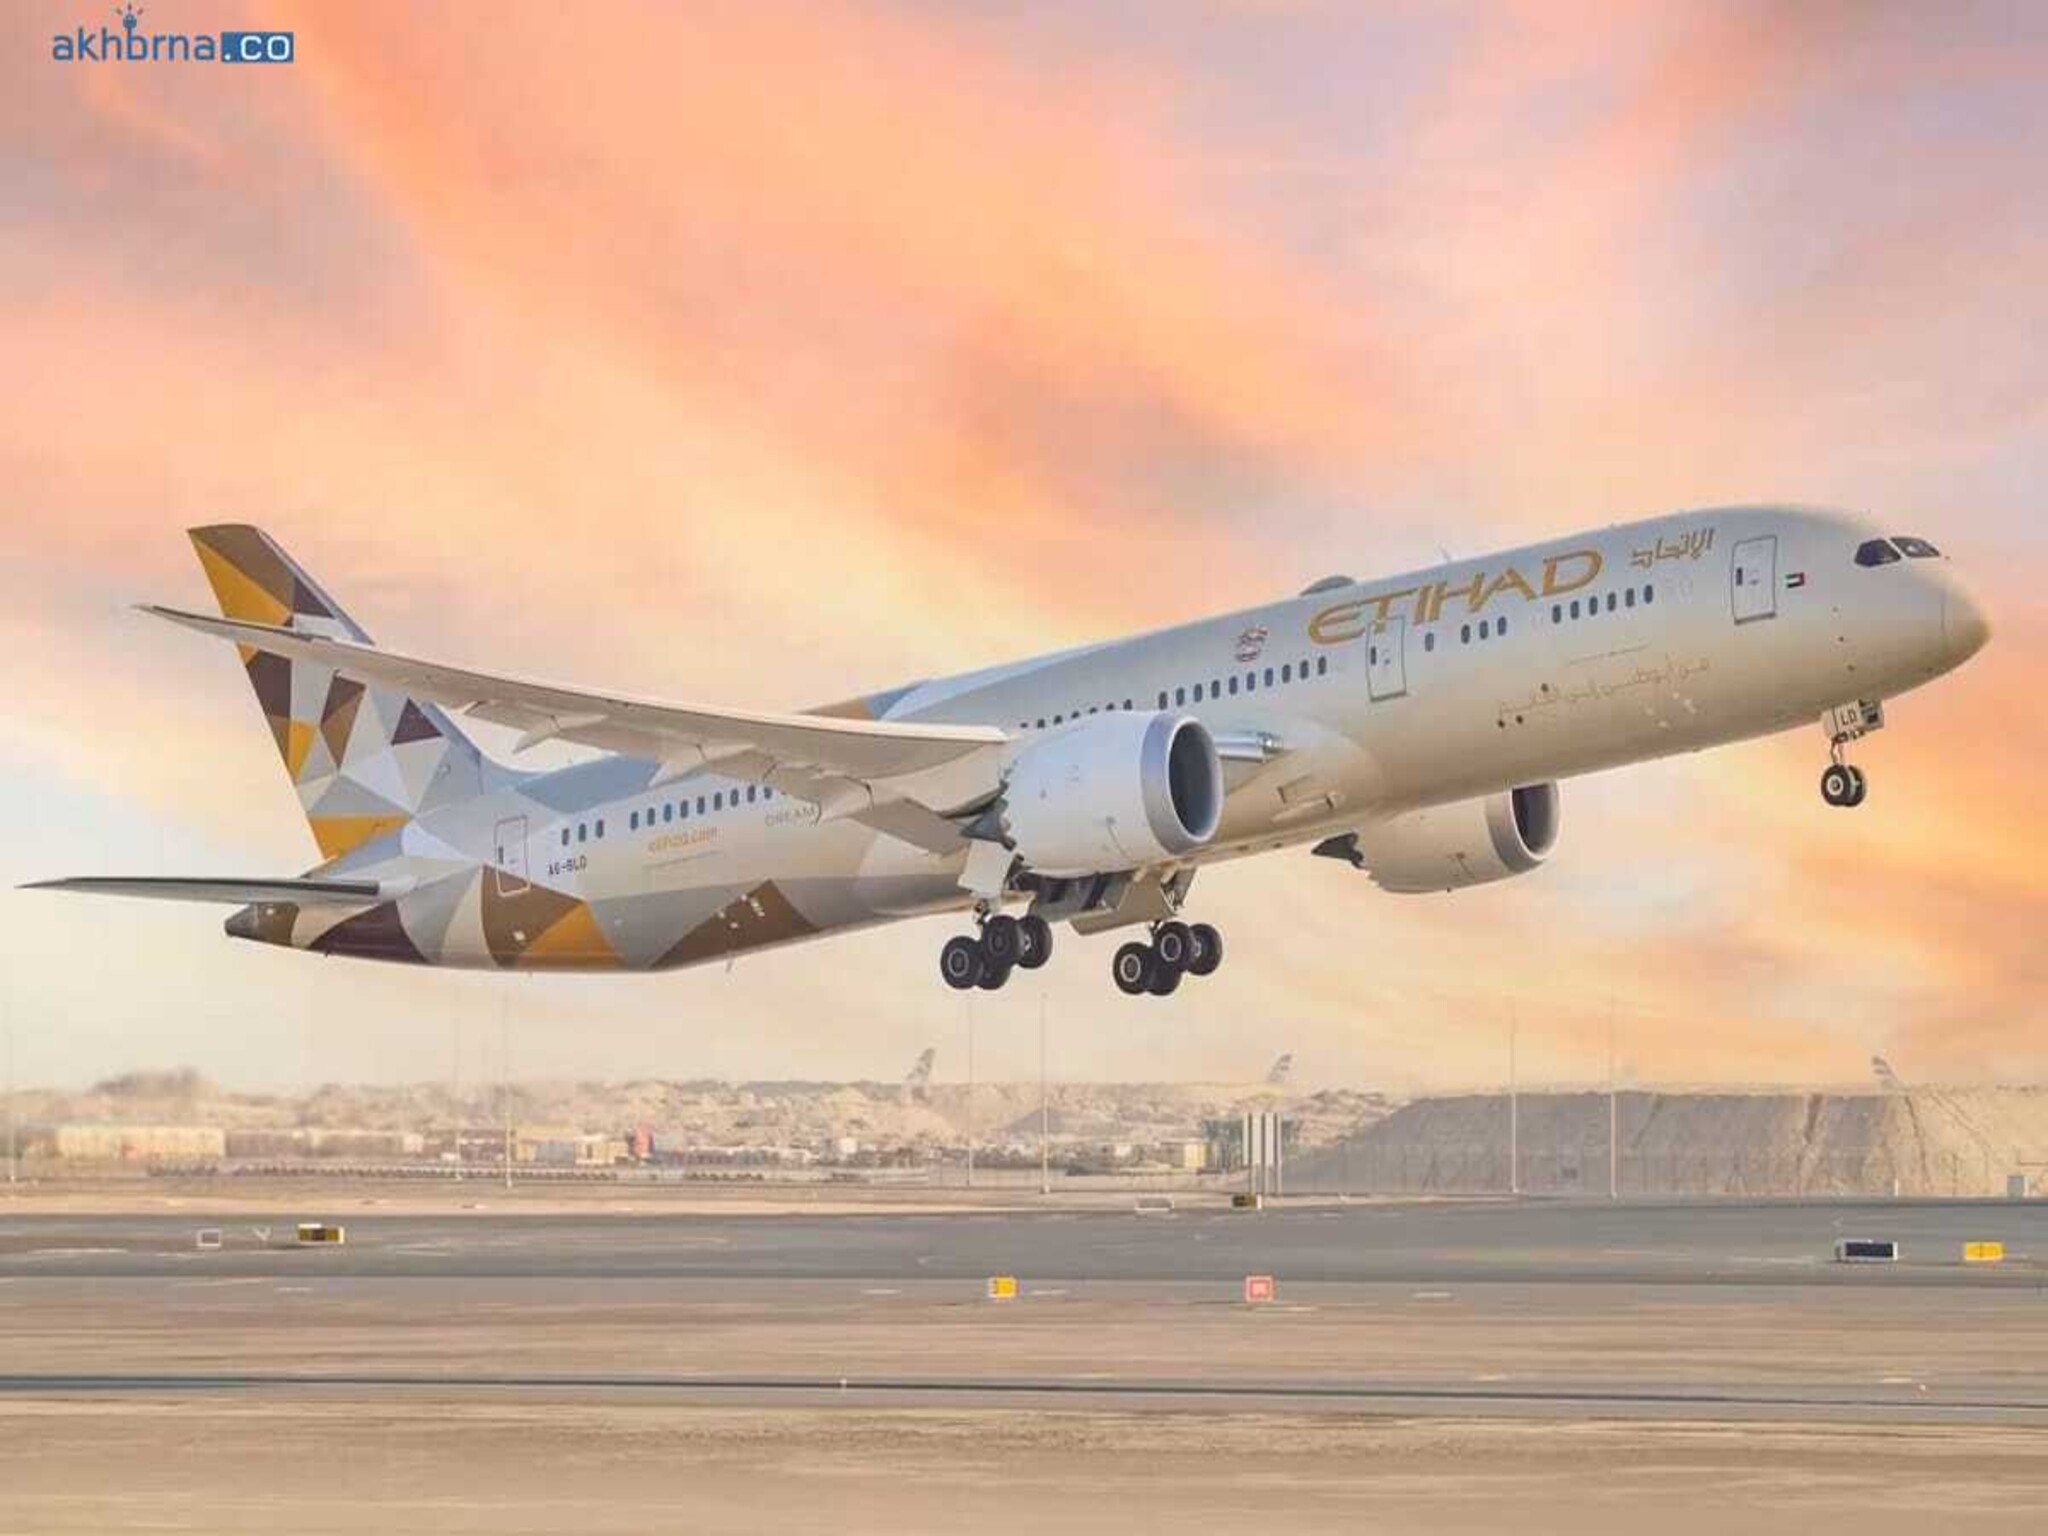  Etihad airways announces the launch of Airbus A380 to New York 